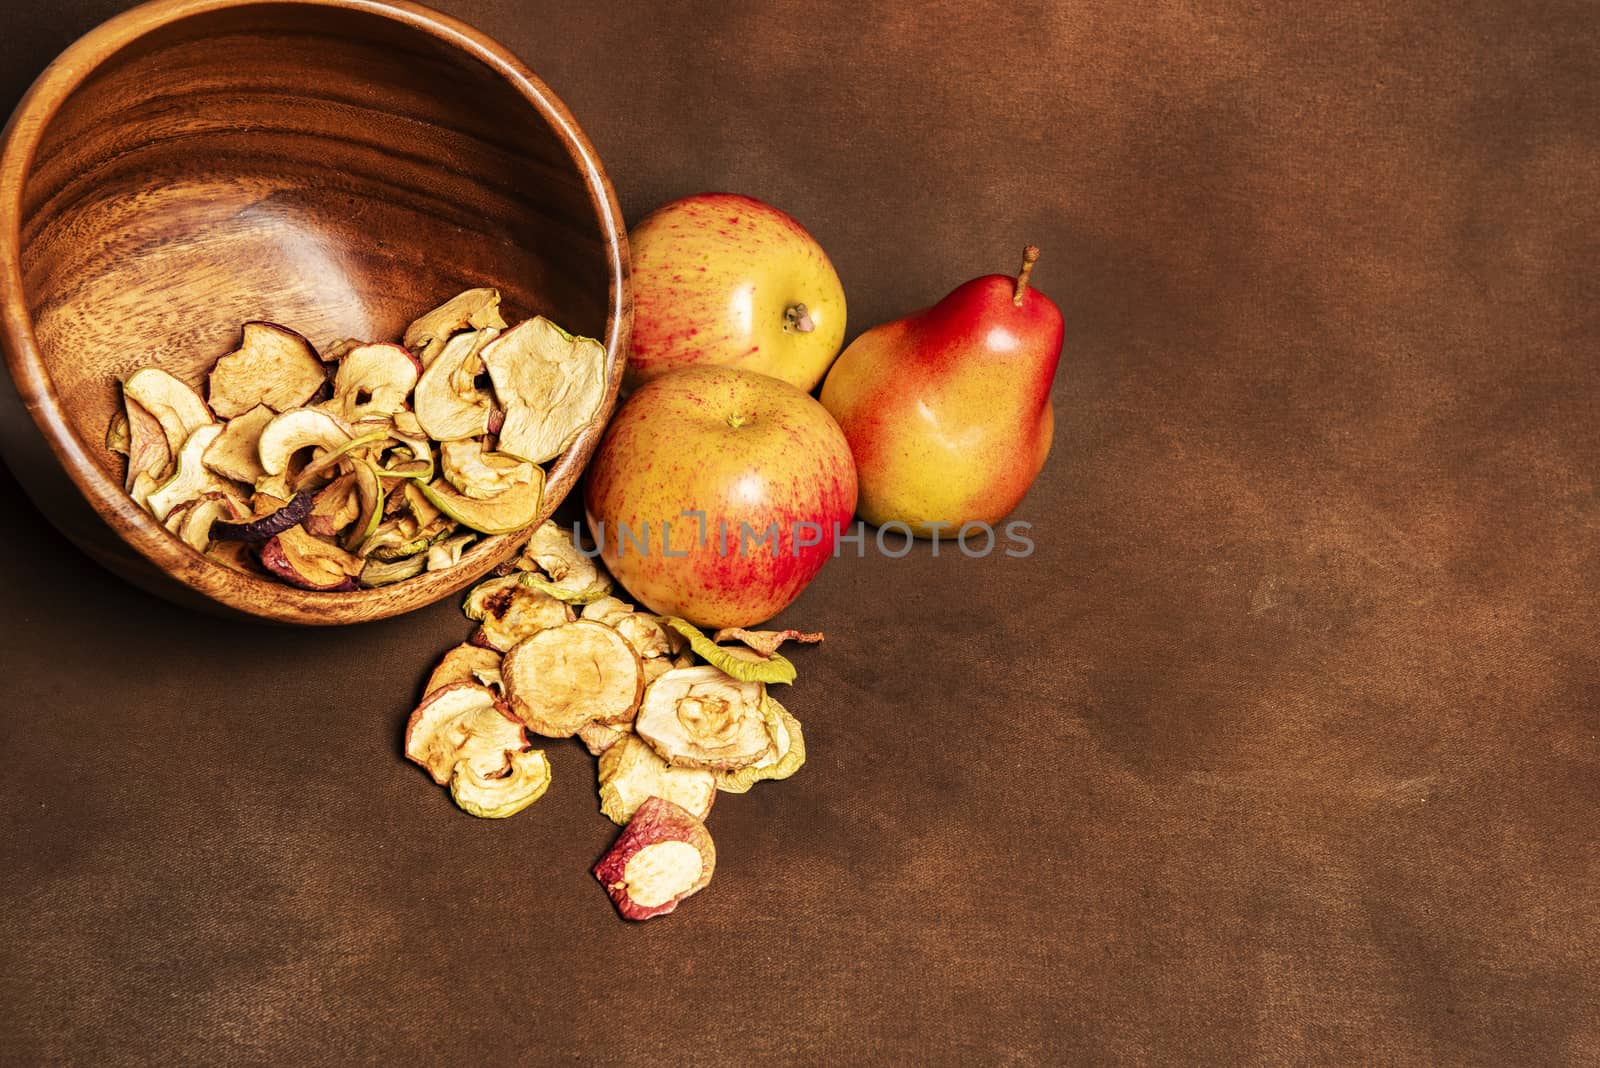 Dried apples and pears on a brown background by fyletto